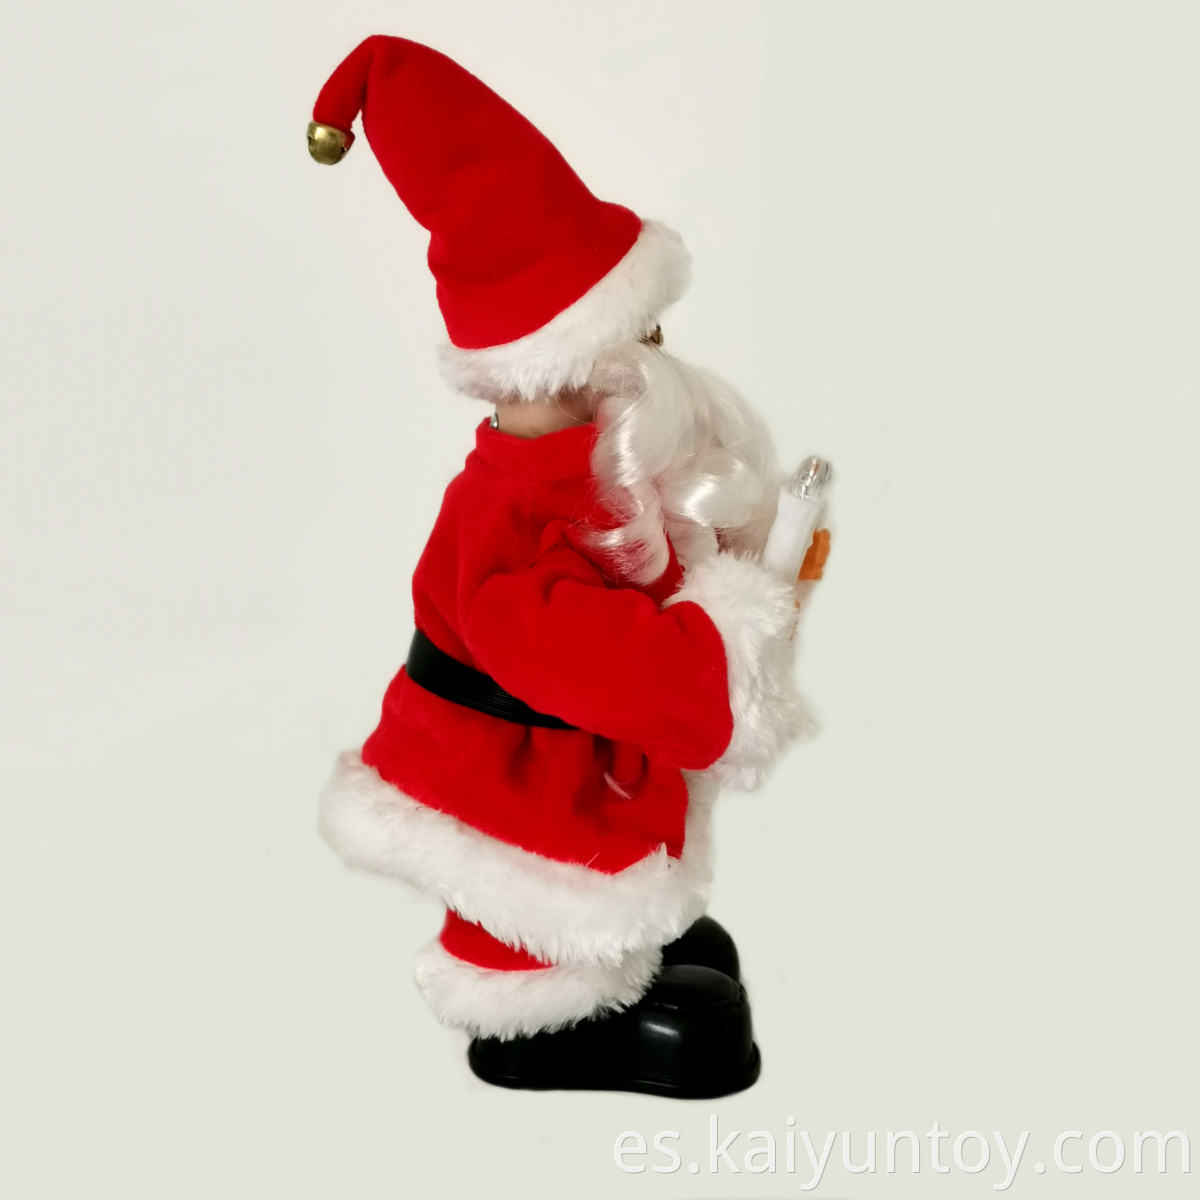 anta Claus Christmas Toy Holiday Decoration